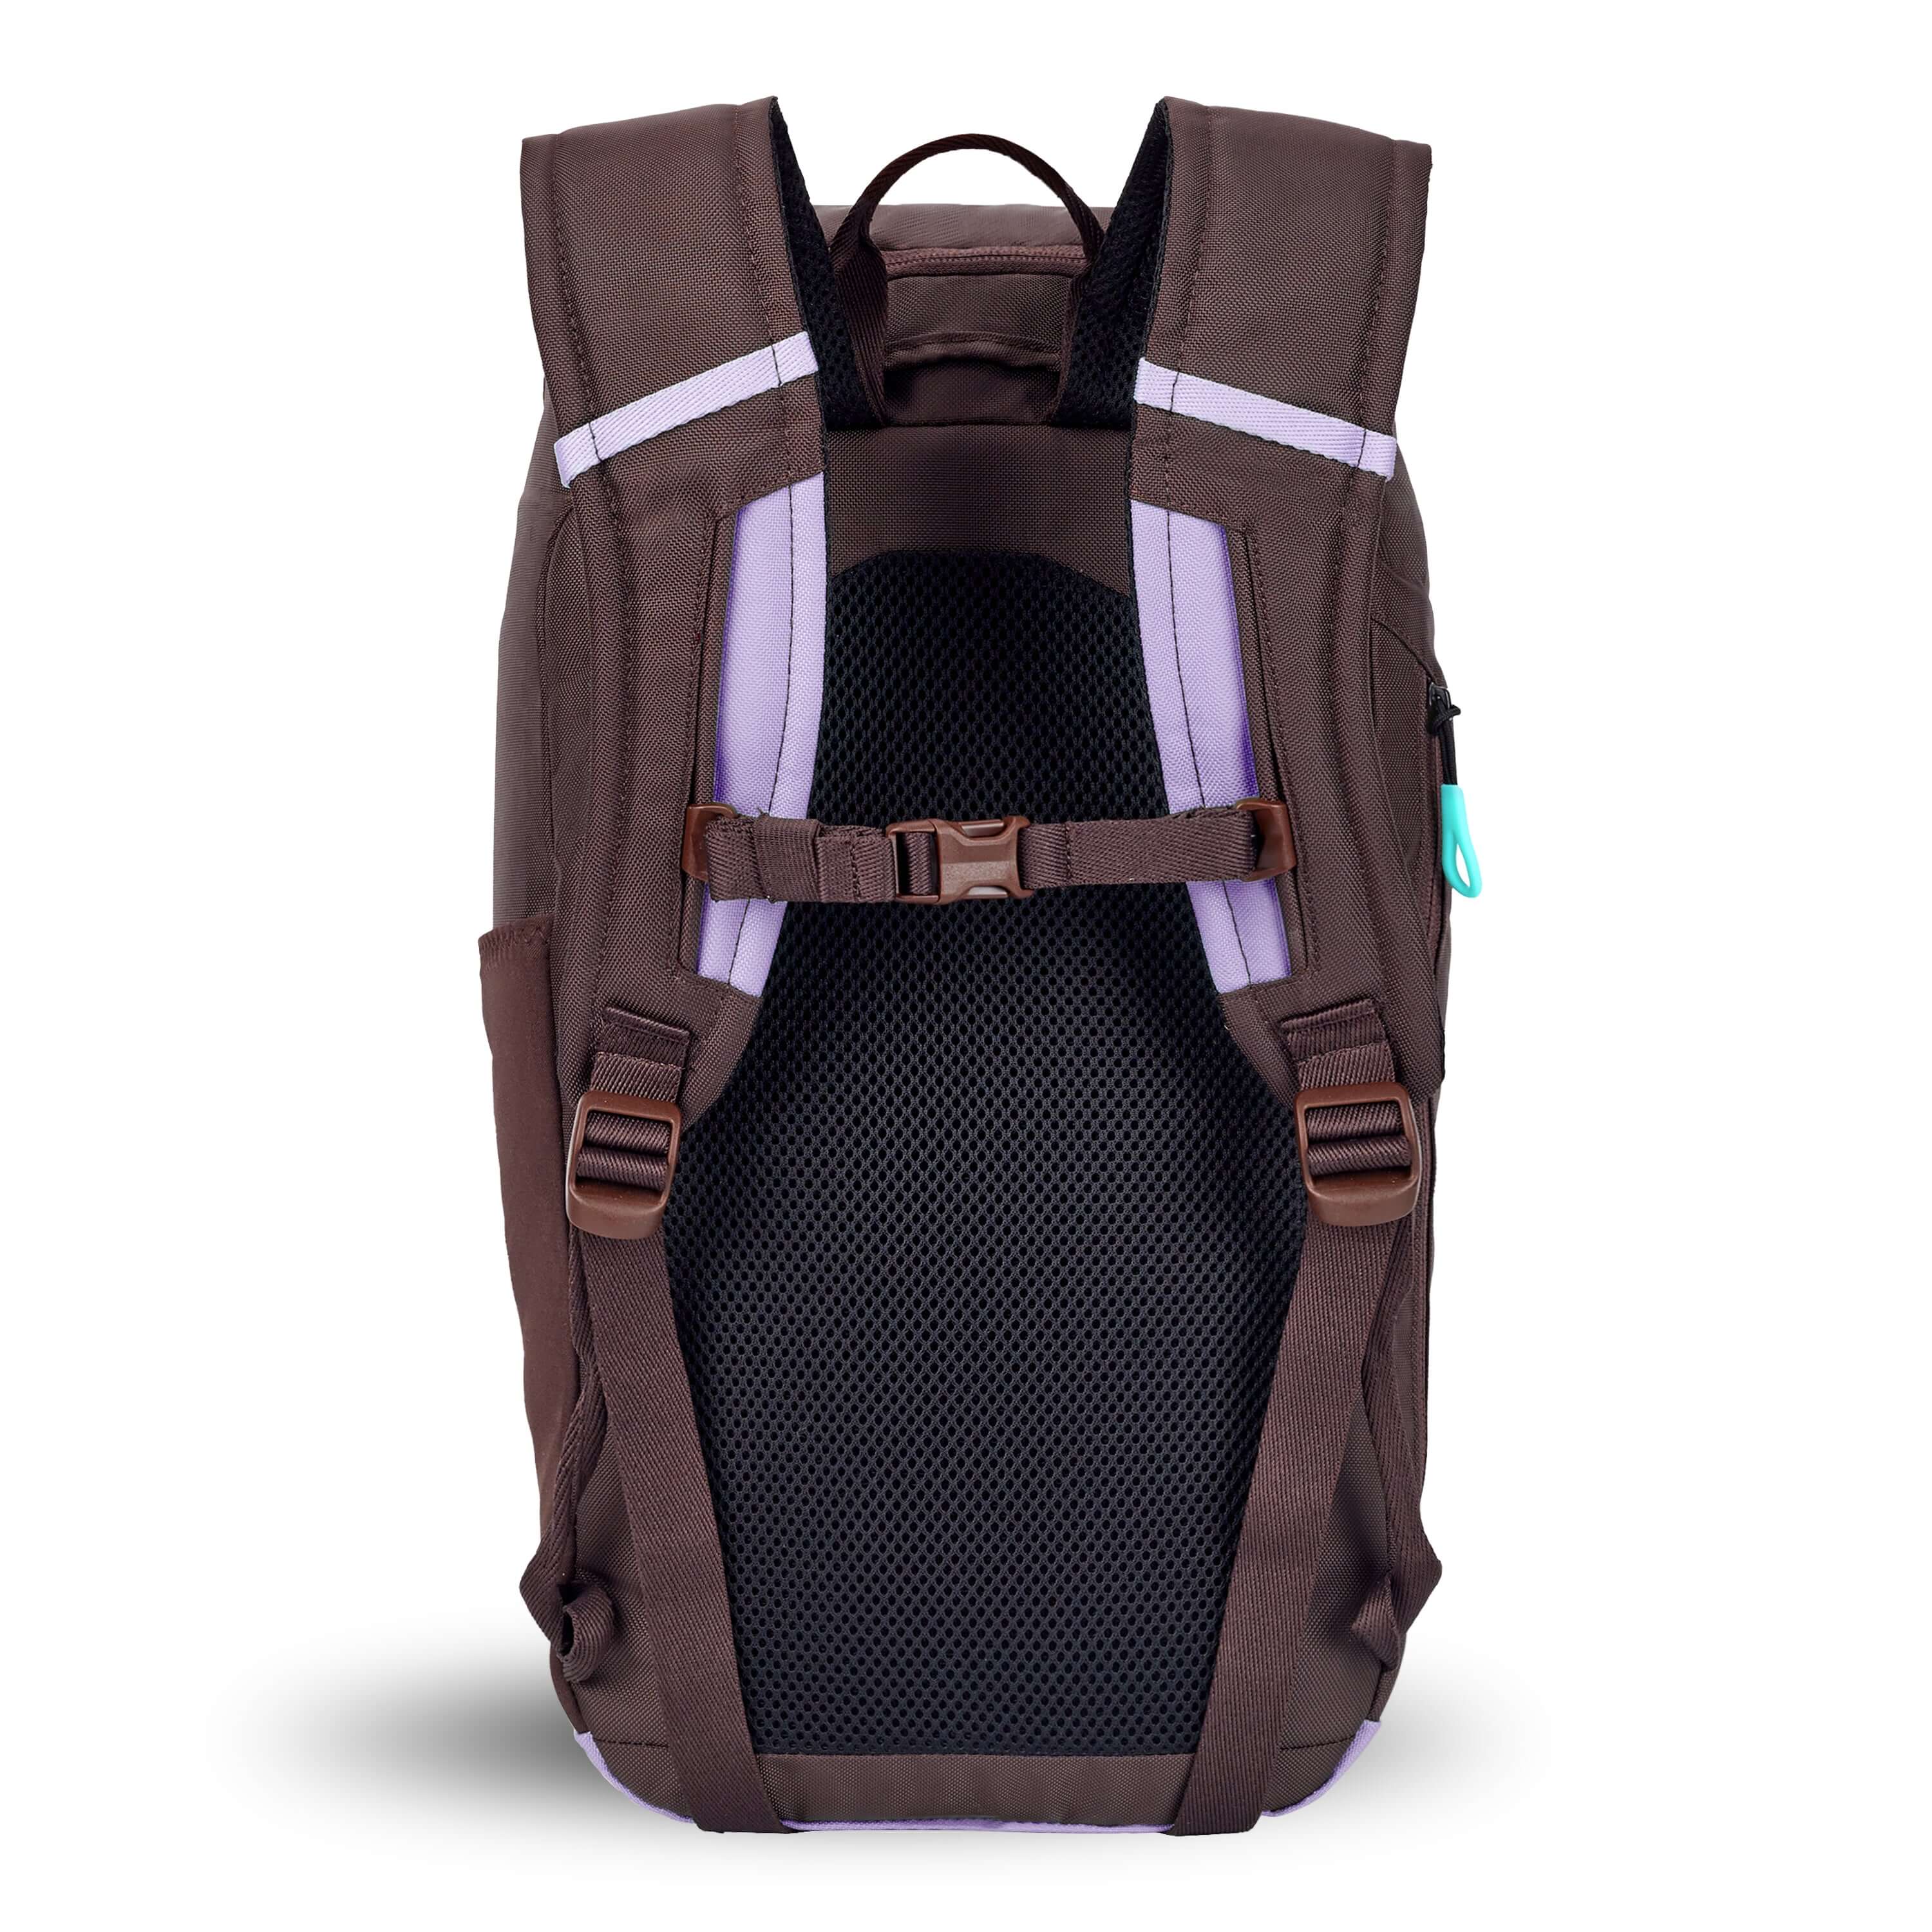 Back view of Sherpani backpack, the Switch in Lavender. The back of the bag is two-toned in lavender and brown. There are padded and adjustable backpack straps with a sternum strap attachment.